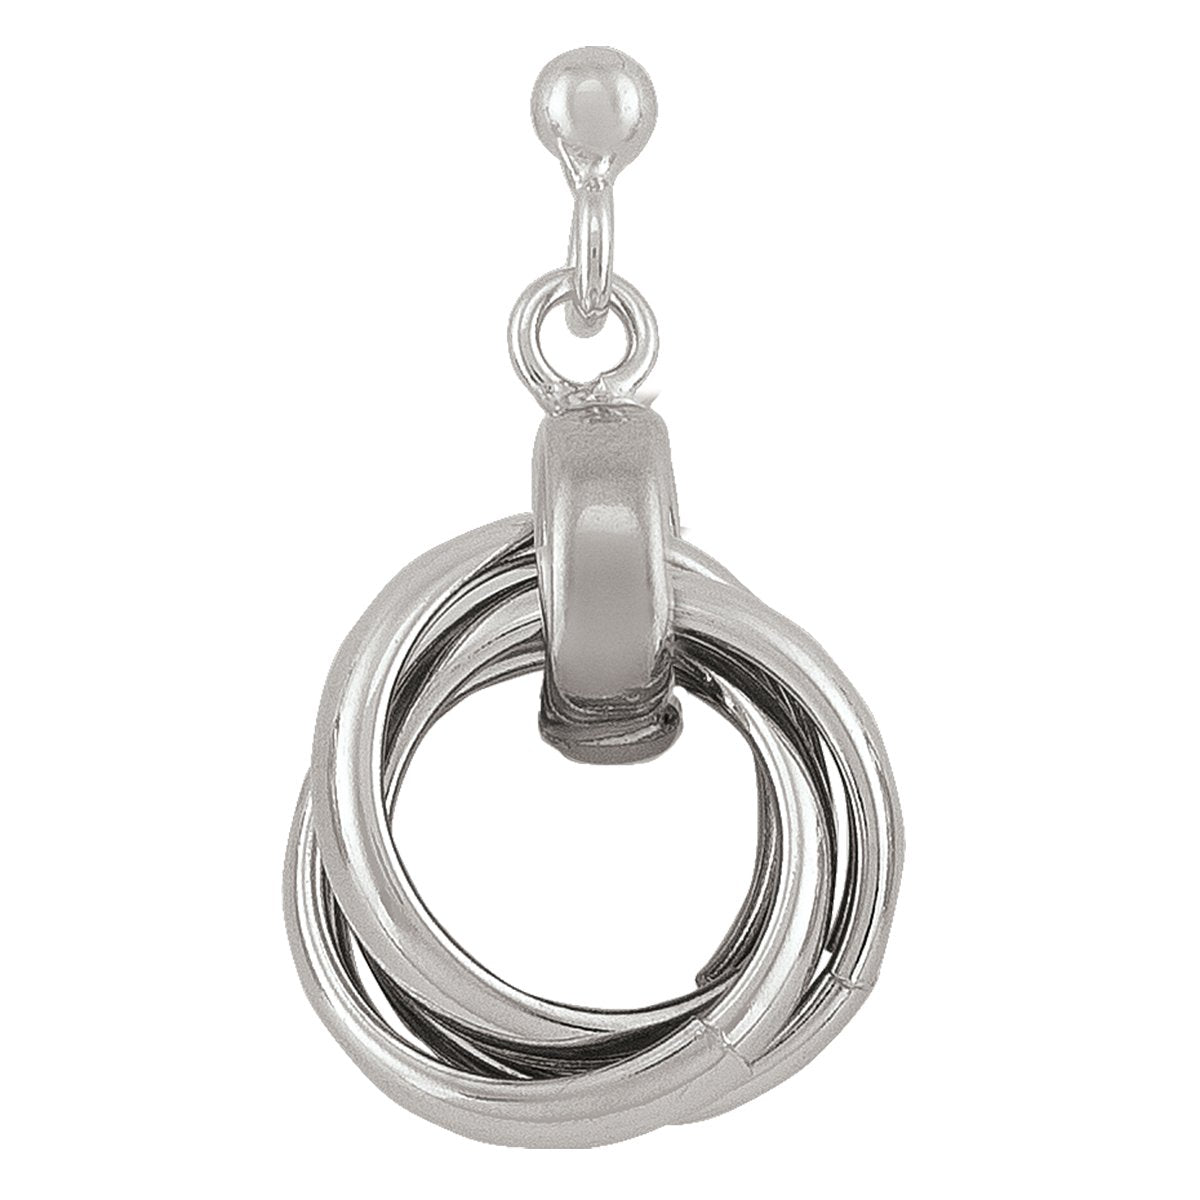 EARRINGS STERLING SILVER RHODIUM PLATED LOVE KNOT DROP 